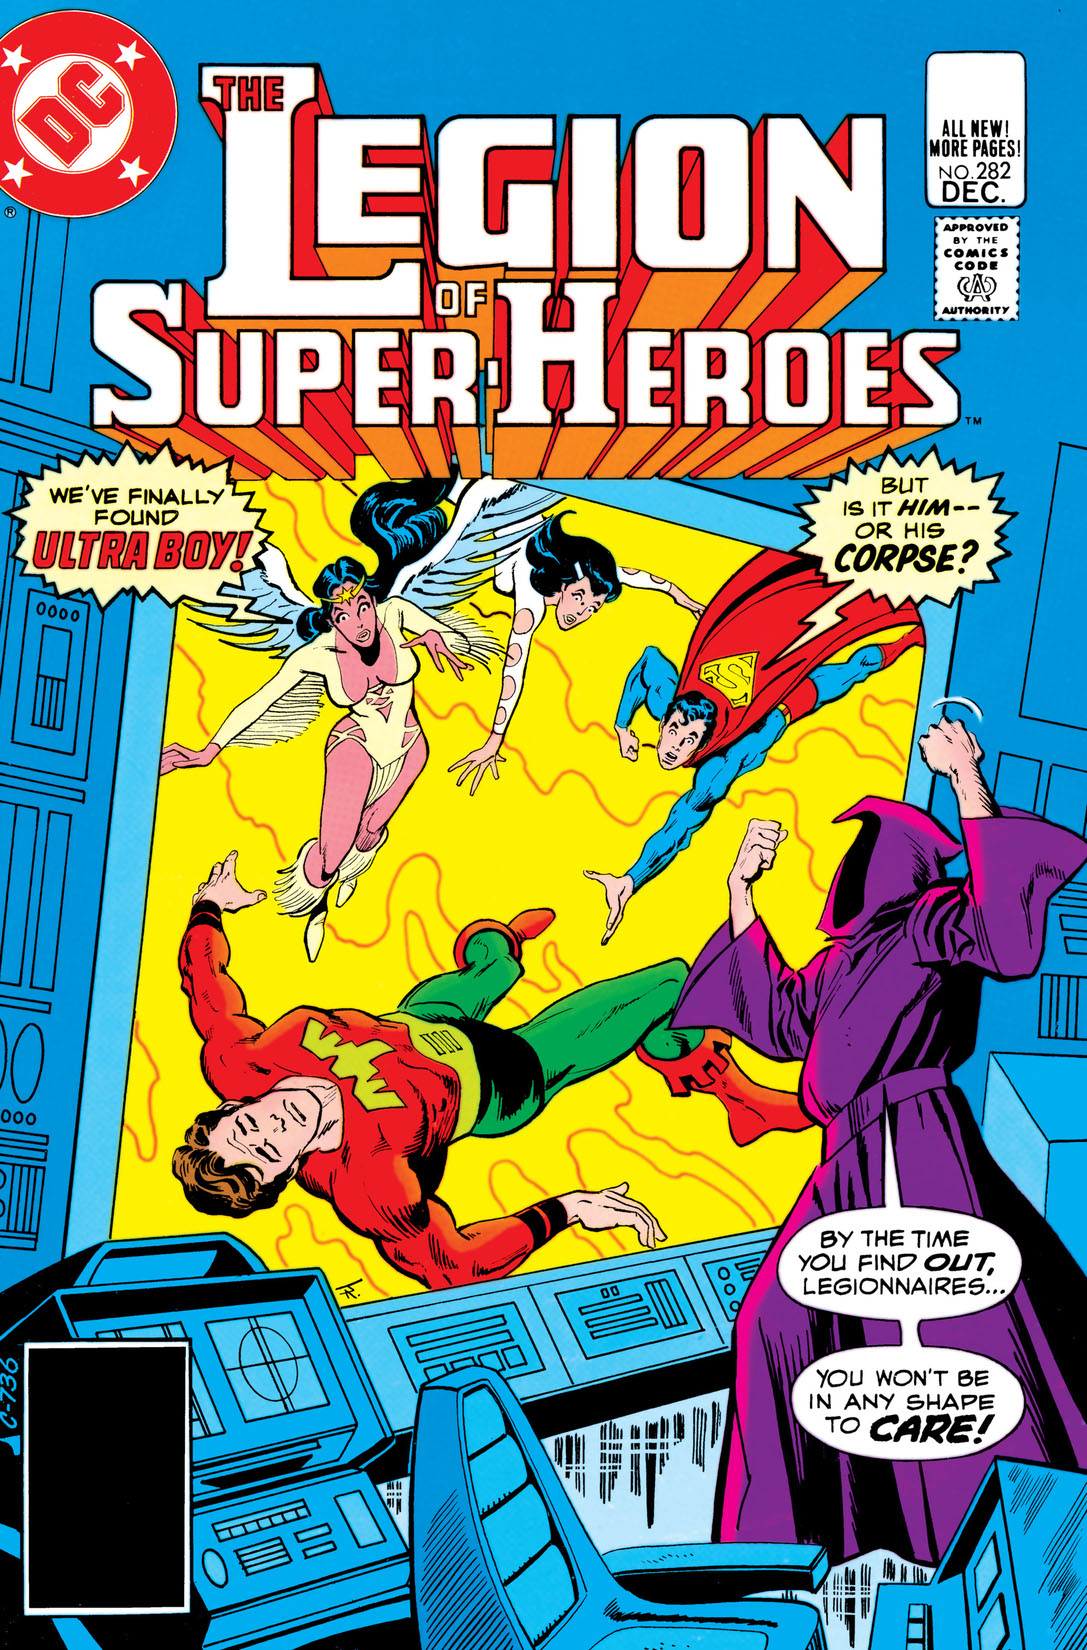 The Legion of Super-Heroes (1980-) #282 preview images